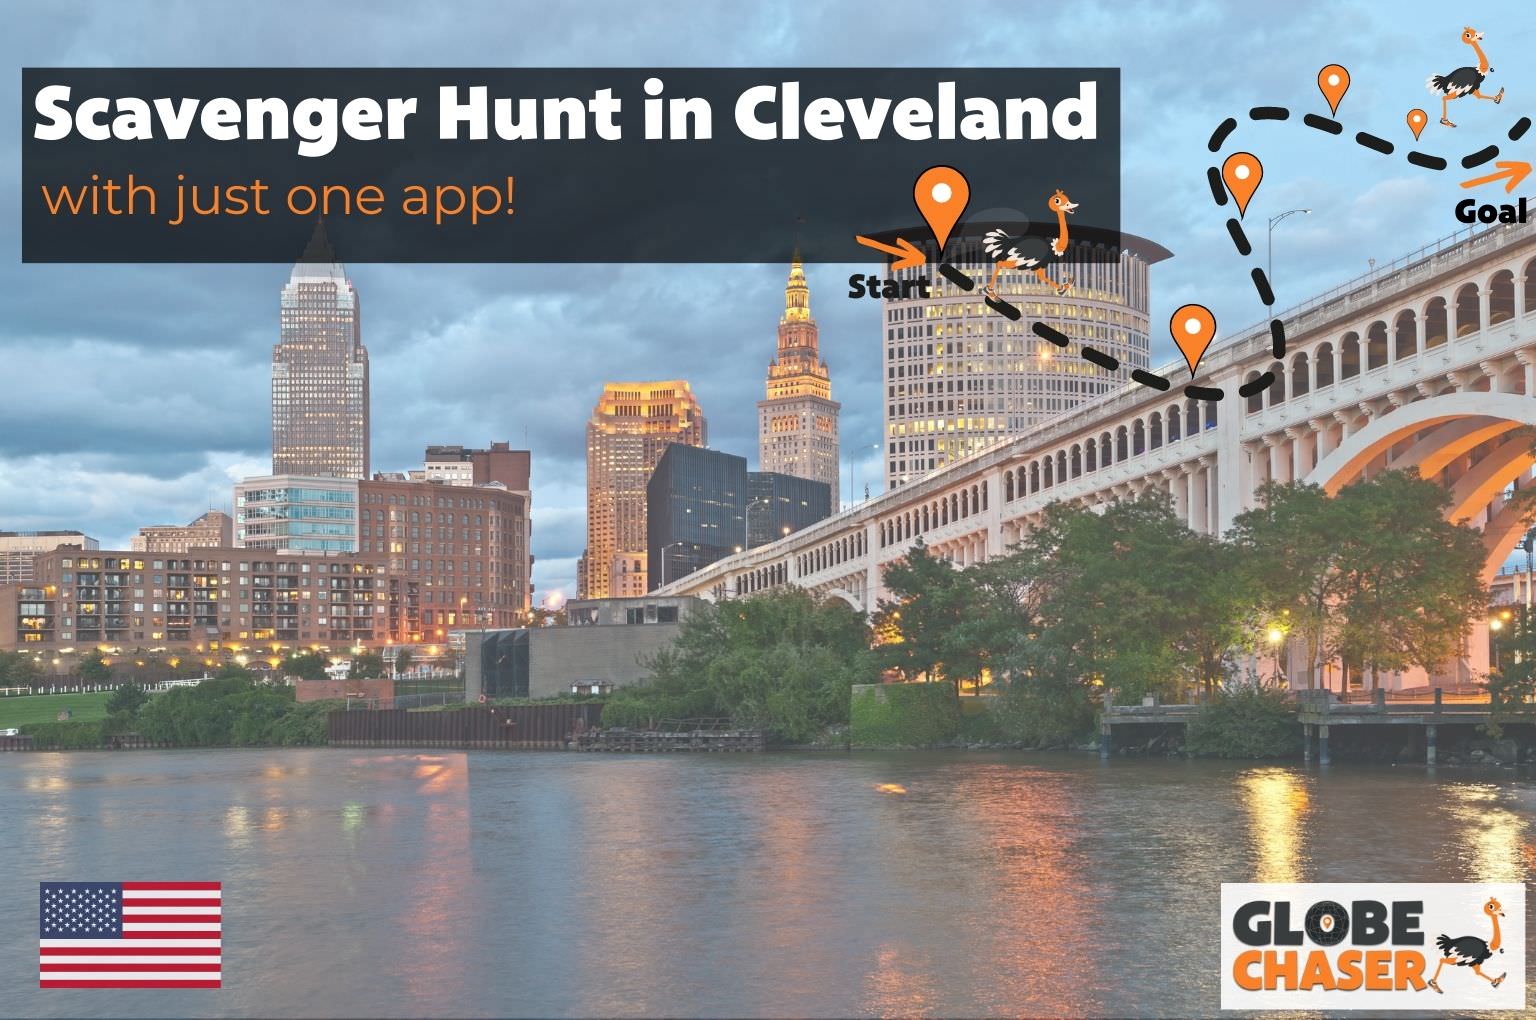 Scavenger Hunt in Cleveland, USA - Family Activities with the Globe Chaser App for Outdoor Fun